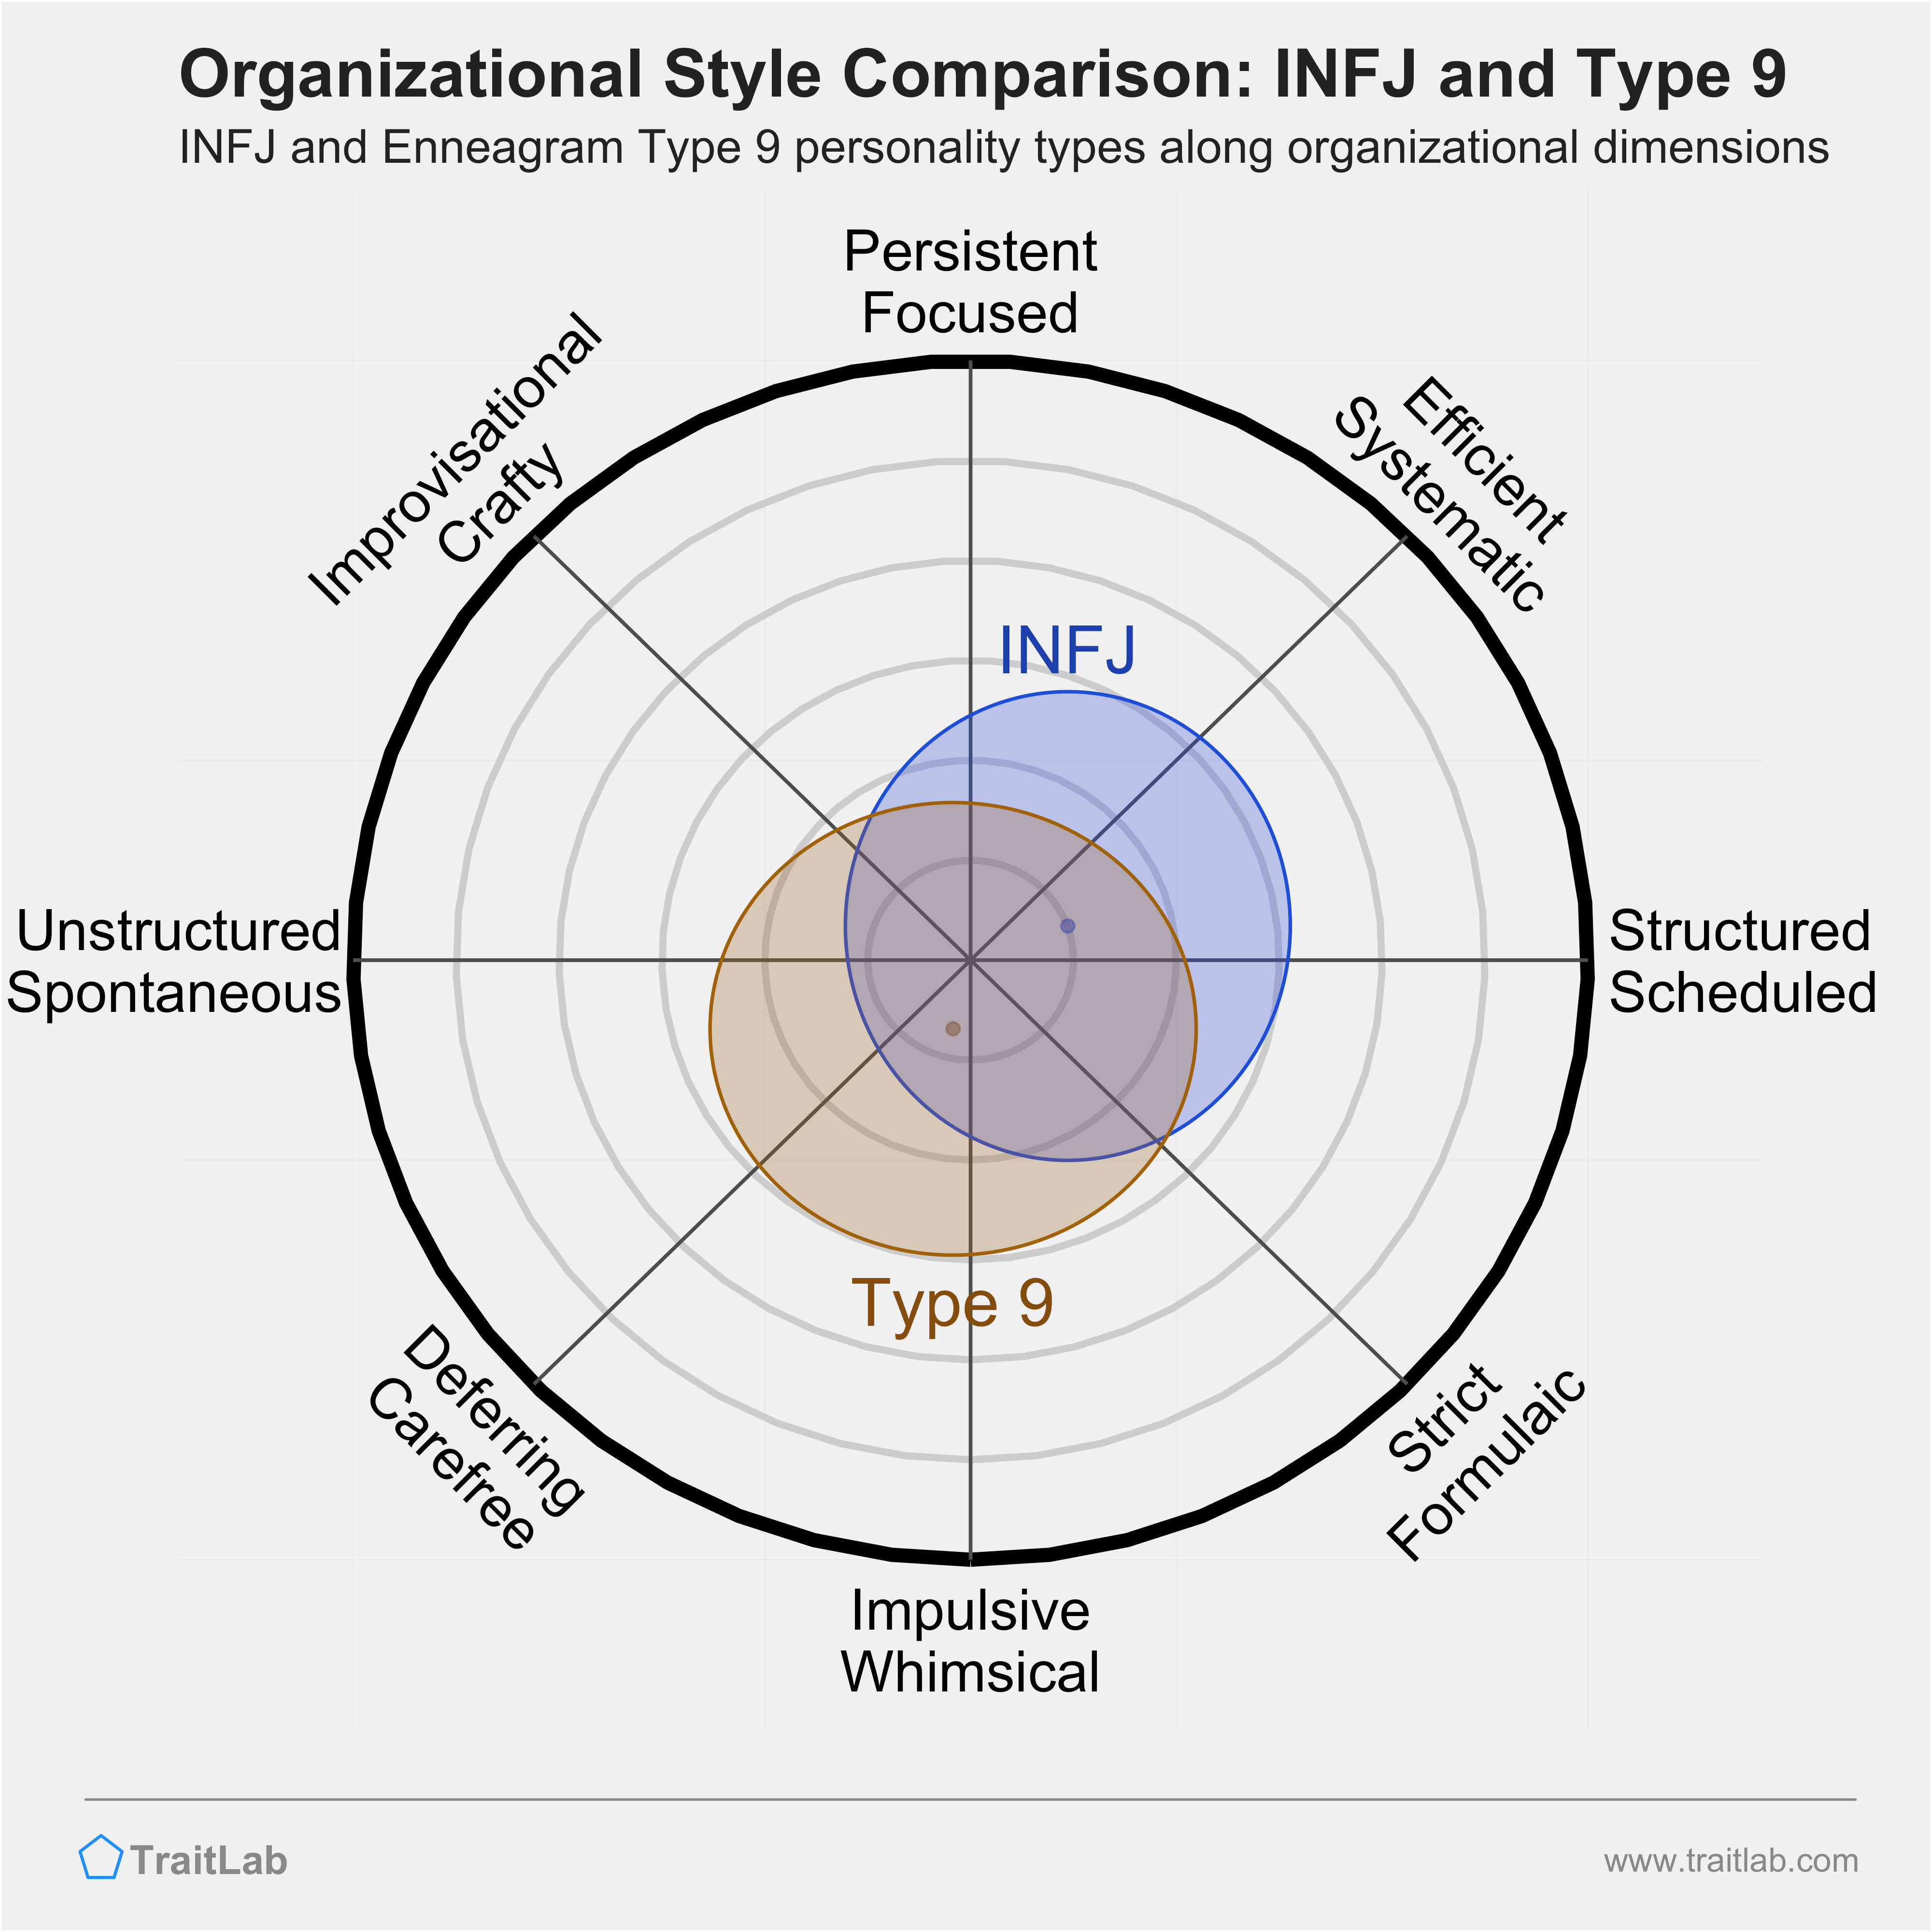 INFJ and Type 9 comparison across organizational dimensions